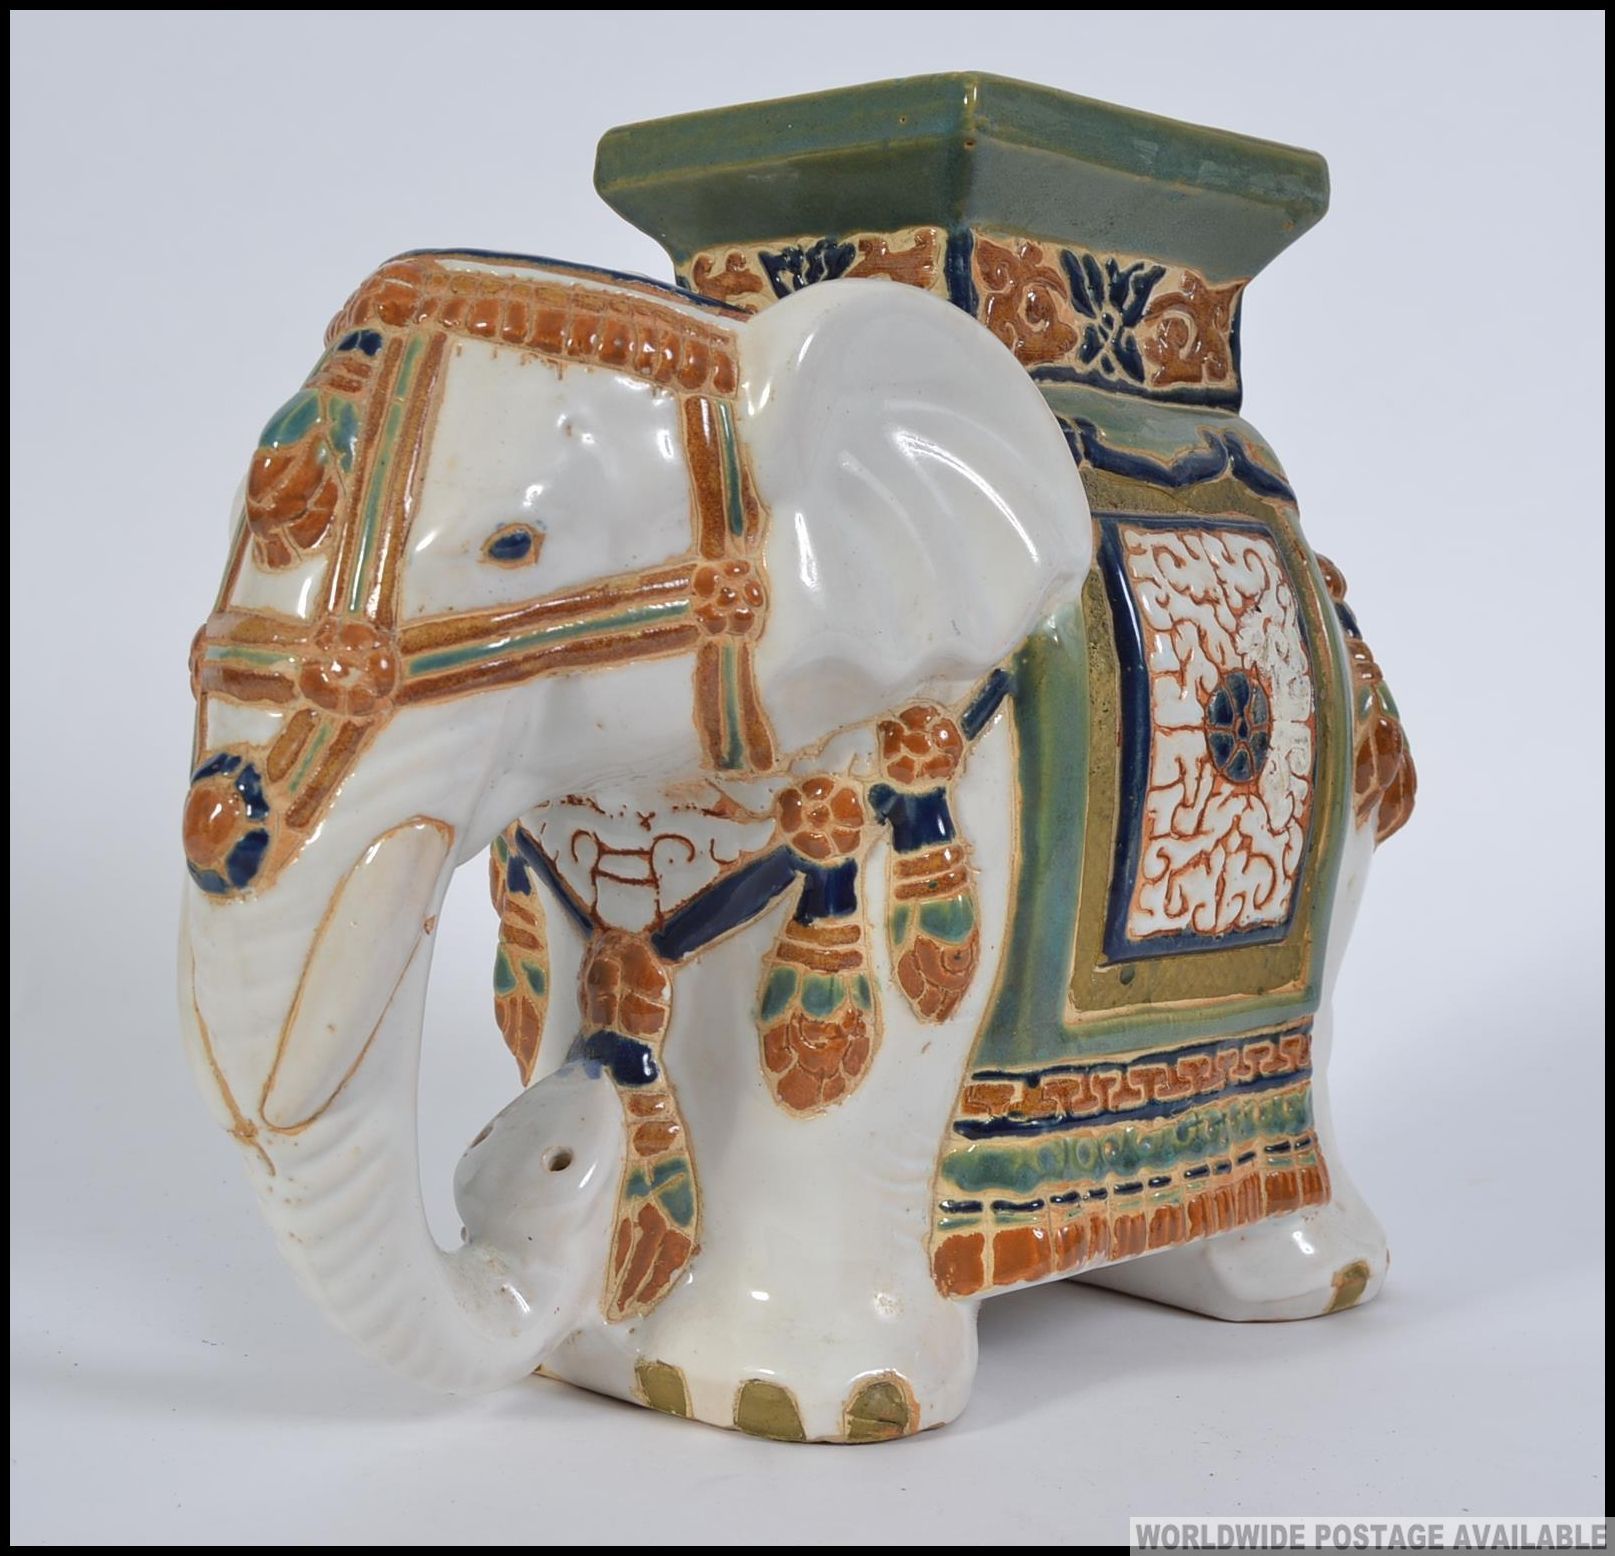 A 20th century large Chinese ceramic planter / stool in the form of an Elephant. Measures: 27cm H.